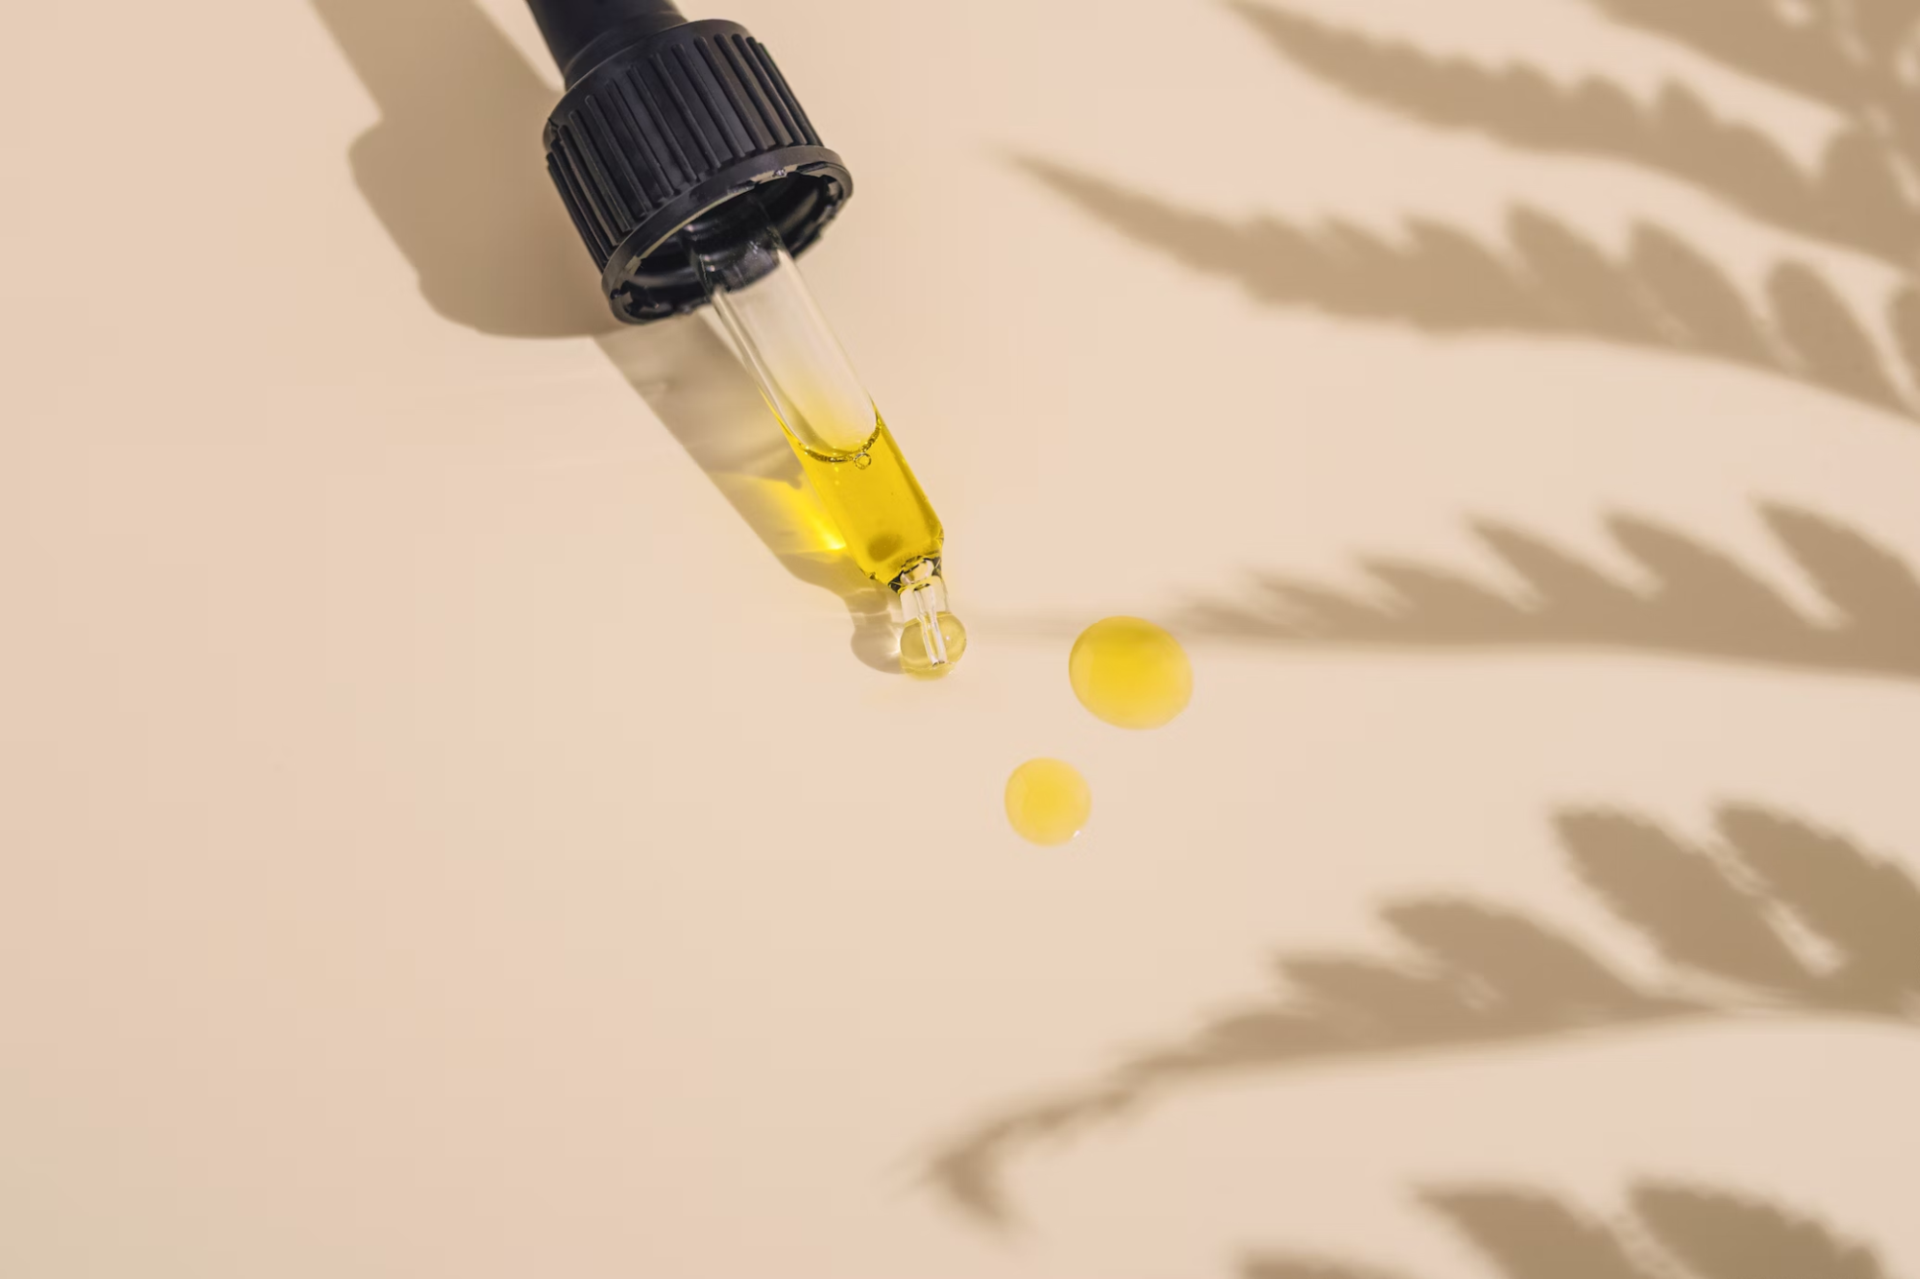 CBD Oil in a syringe, on a beige background.